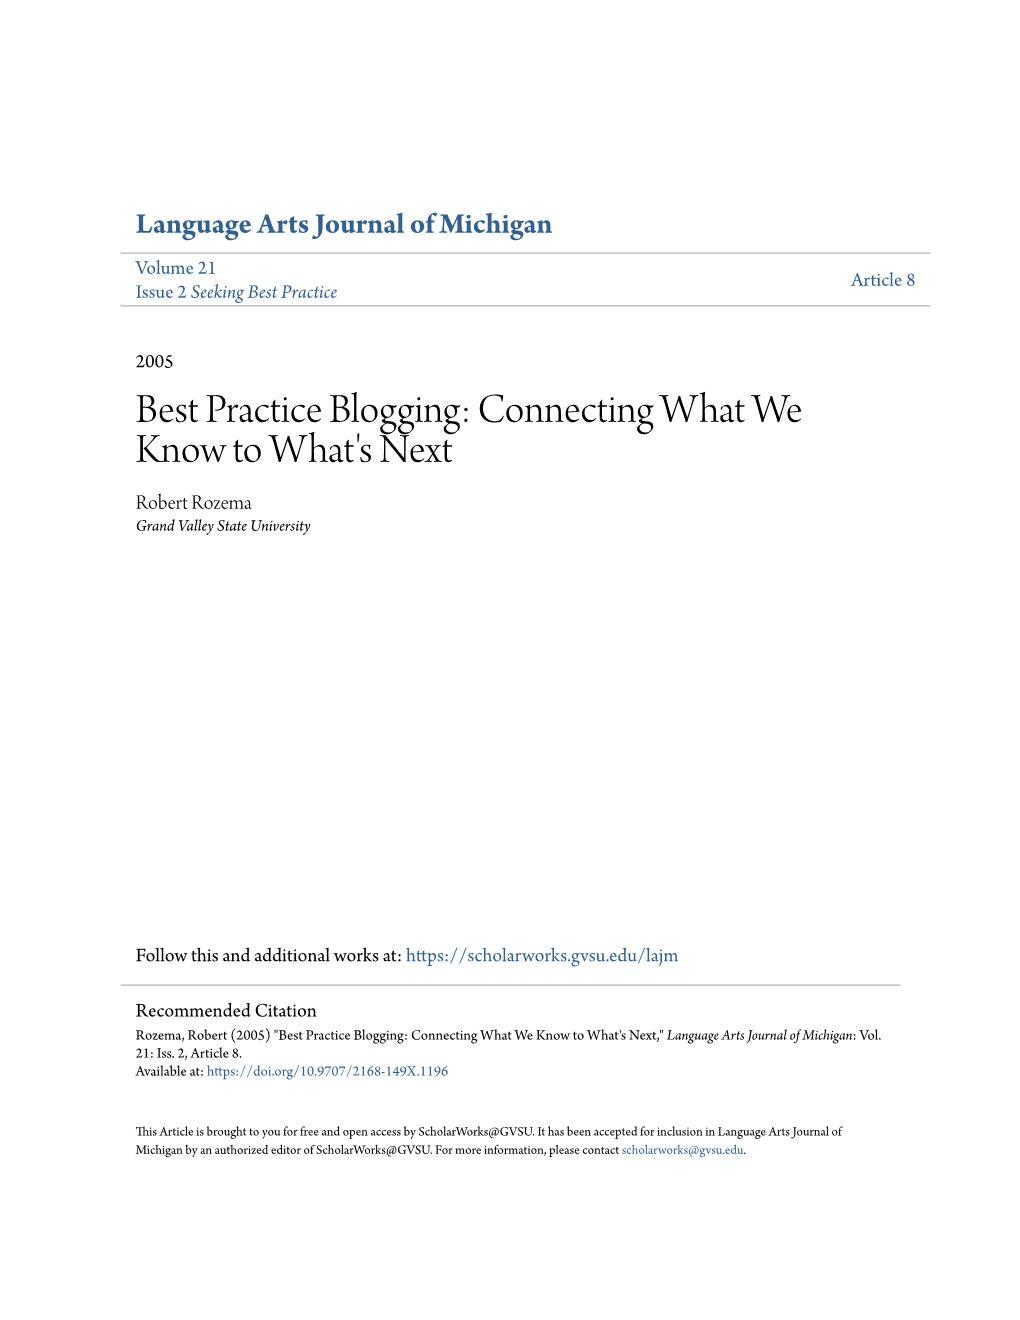 Best Practice Blogging: Connecting What We Know to What's Next Robert Rozema Grand Valley State University